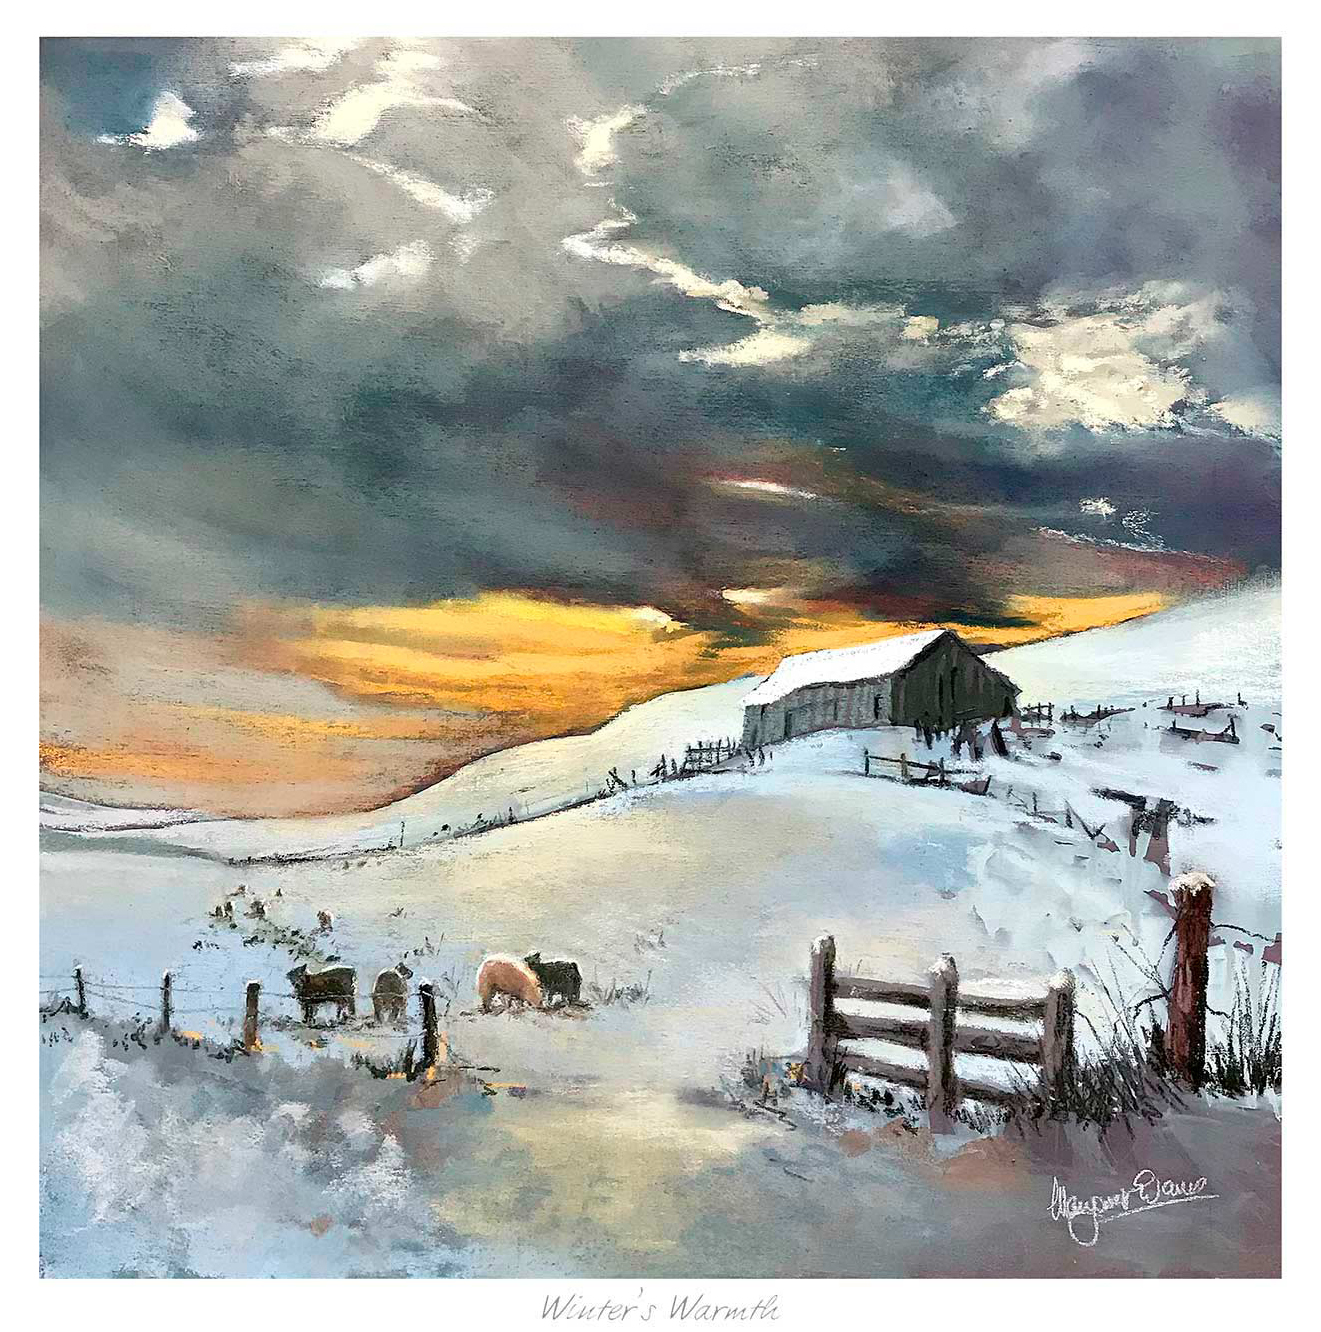 A painting of a rural winter scene with sheep, a barn, and a dramatic sky, By Margaret Evans